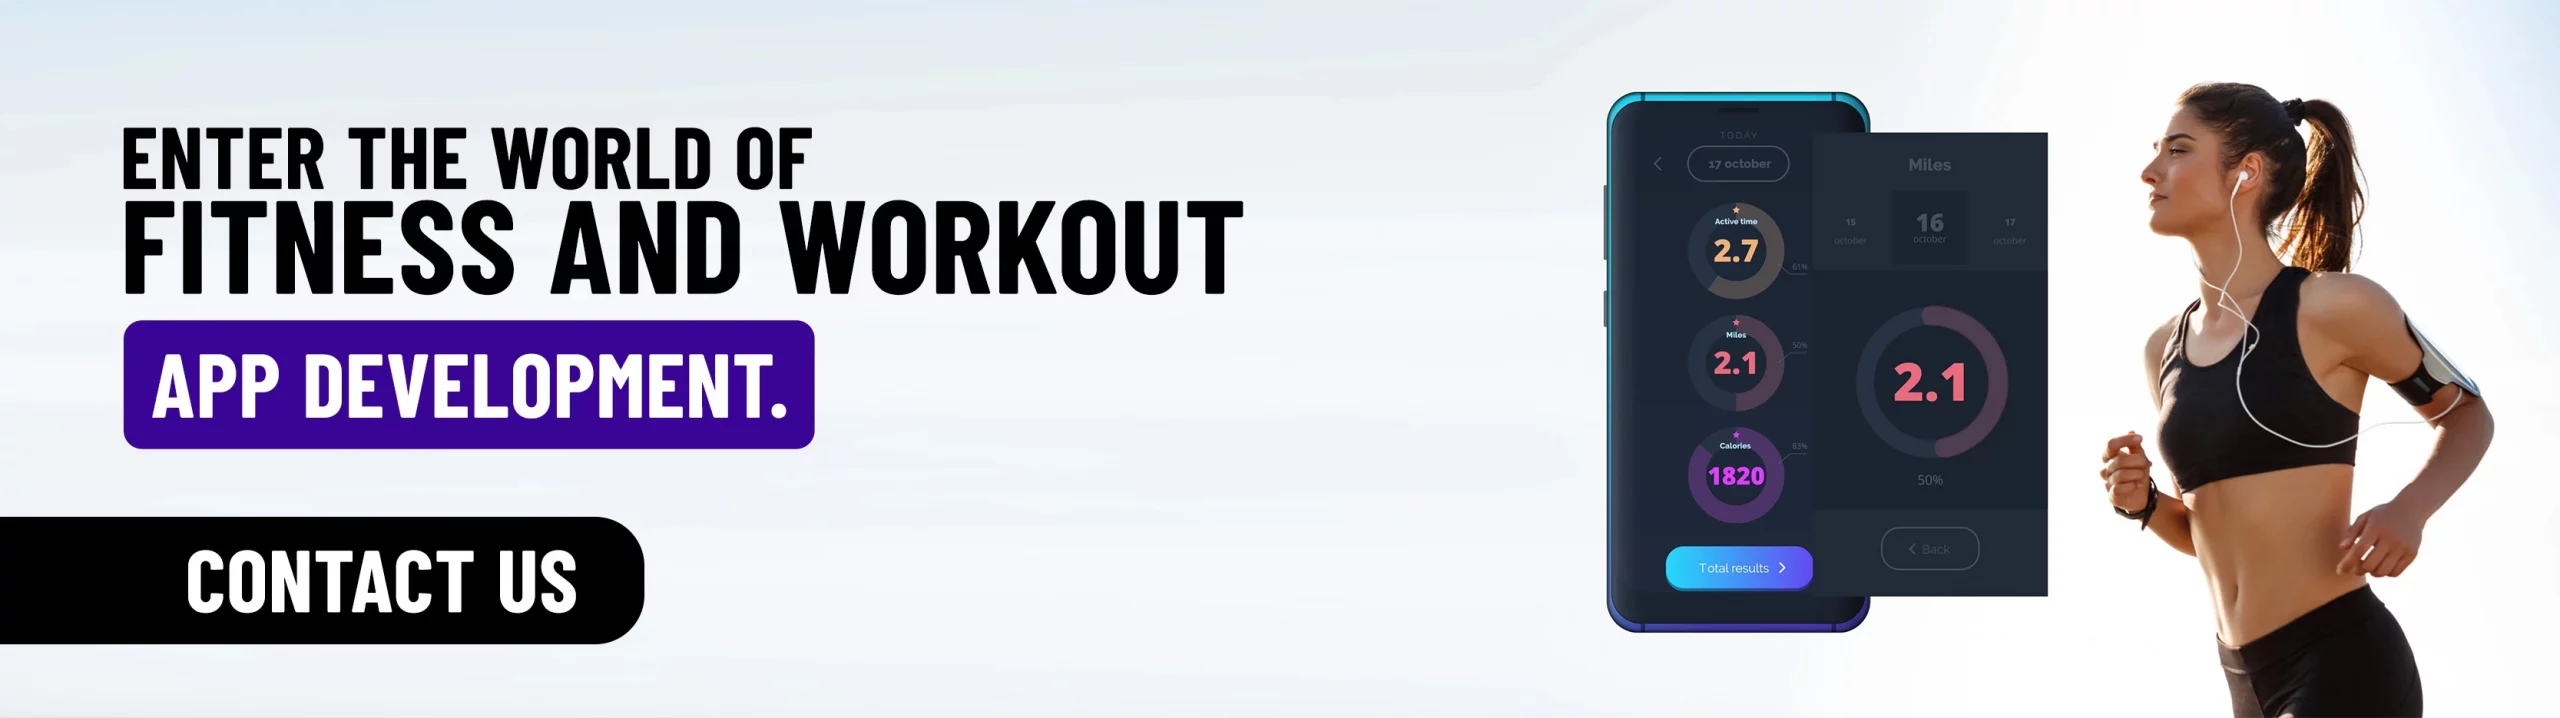 Increase your users with fitness and workout app development.